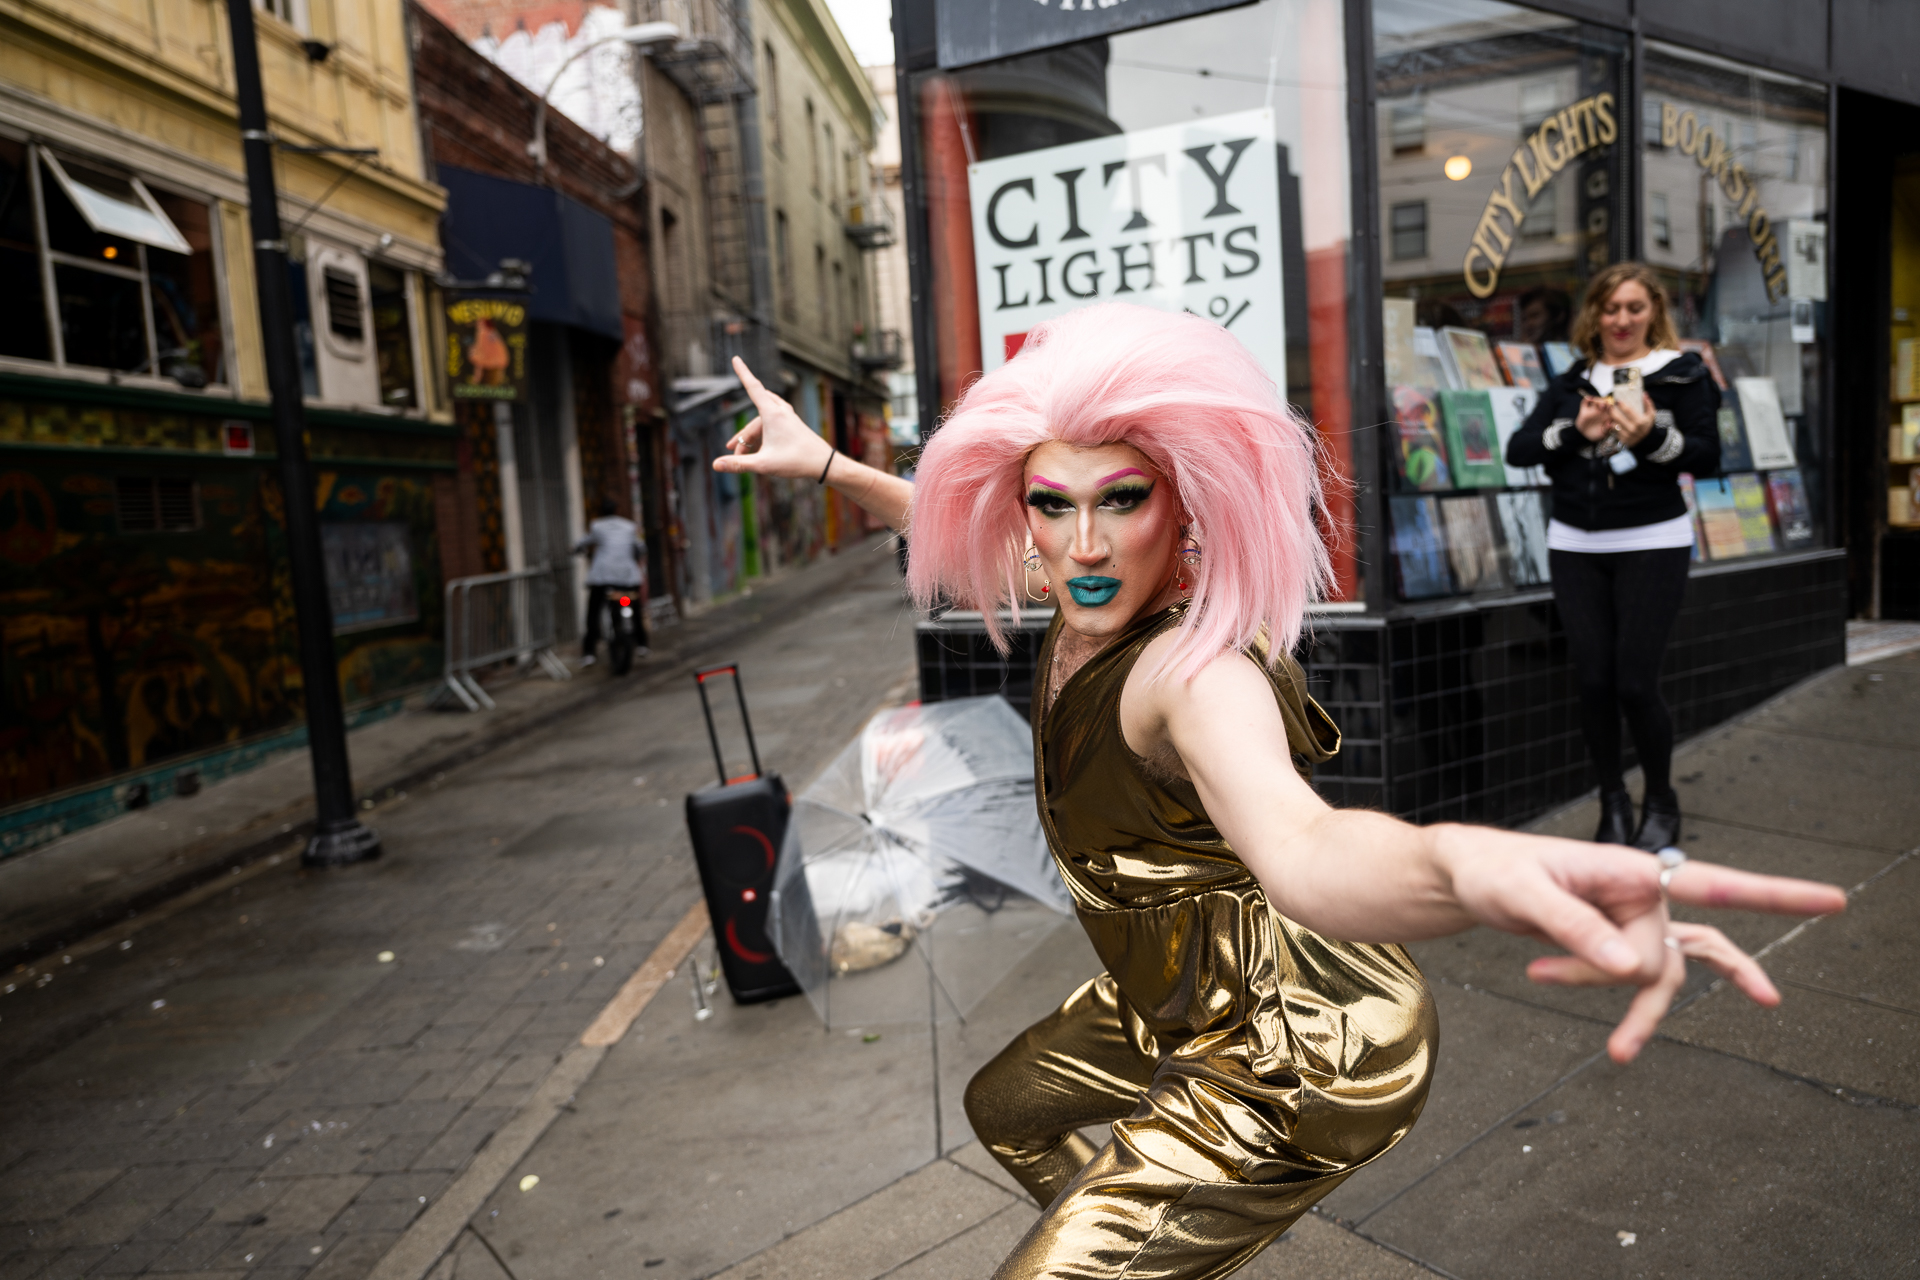 A drag artist performs in front of City Lights bookstore in North Beach.